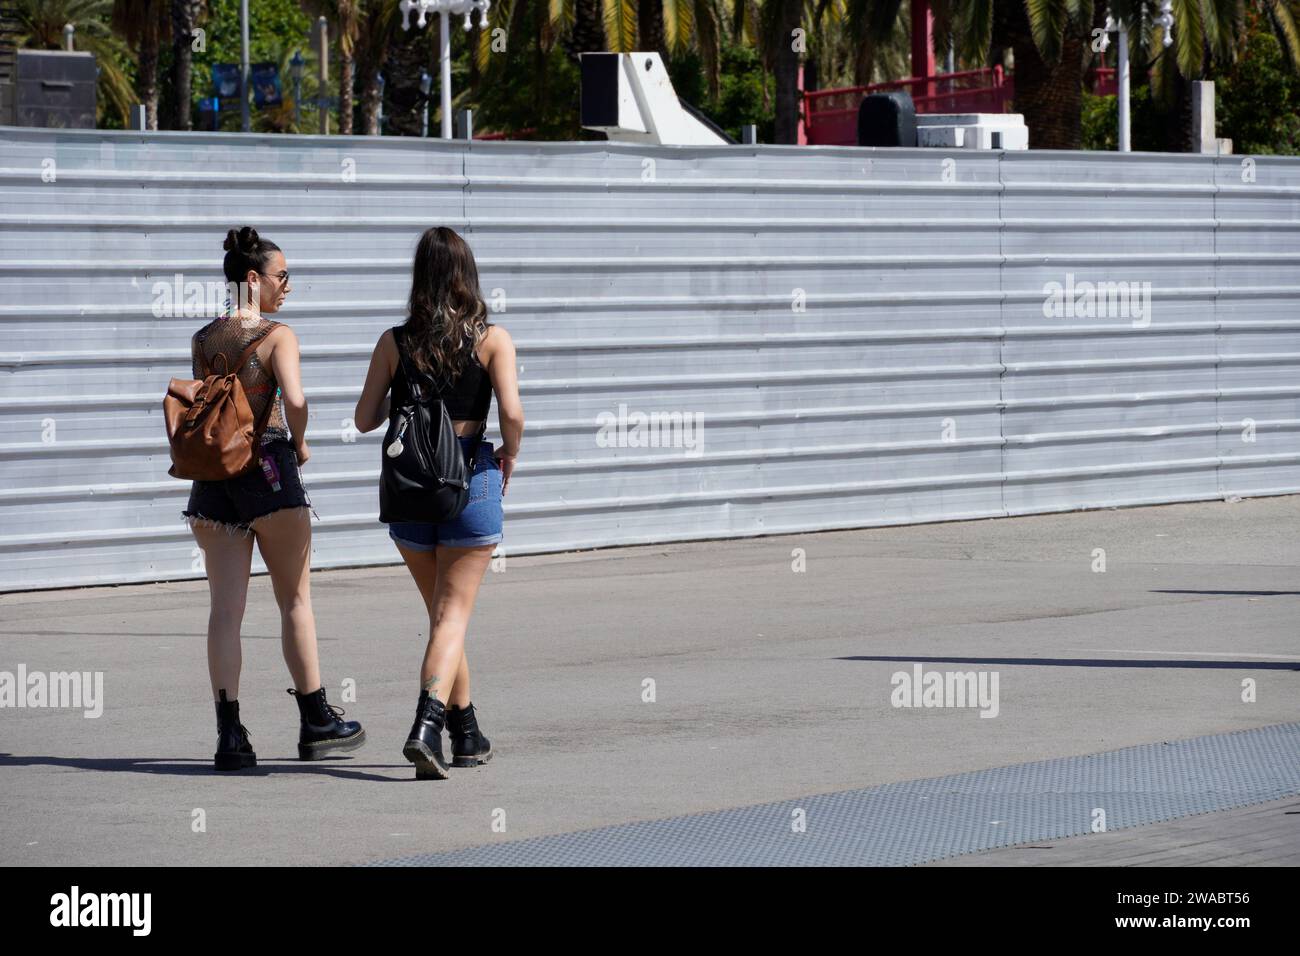 Barcelona, Spain - May 26, 2022: Two stylish young girls walk through the construction zone dressed in jean shorts and military boots, both carrying b Stock Photo